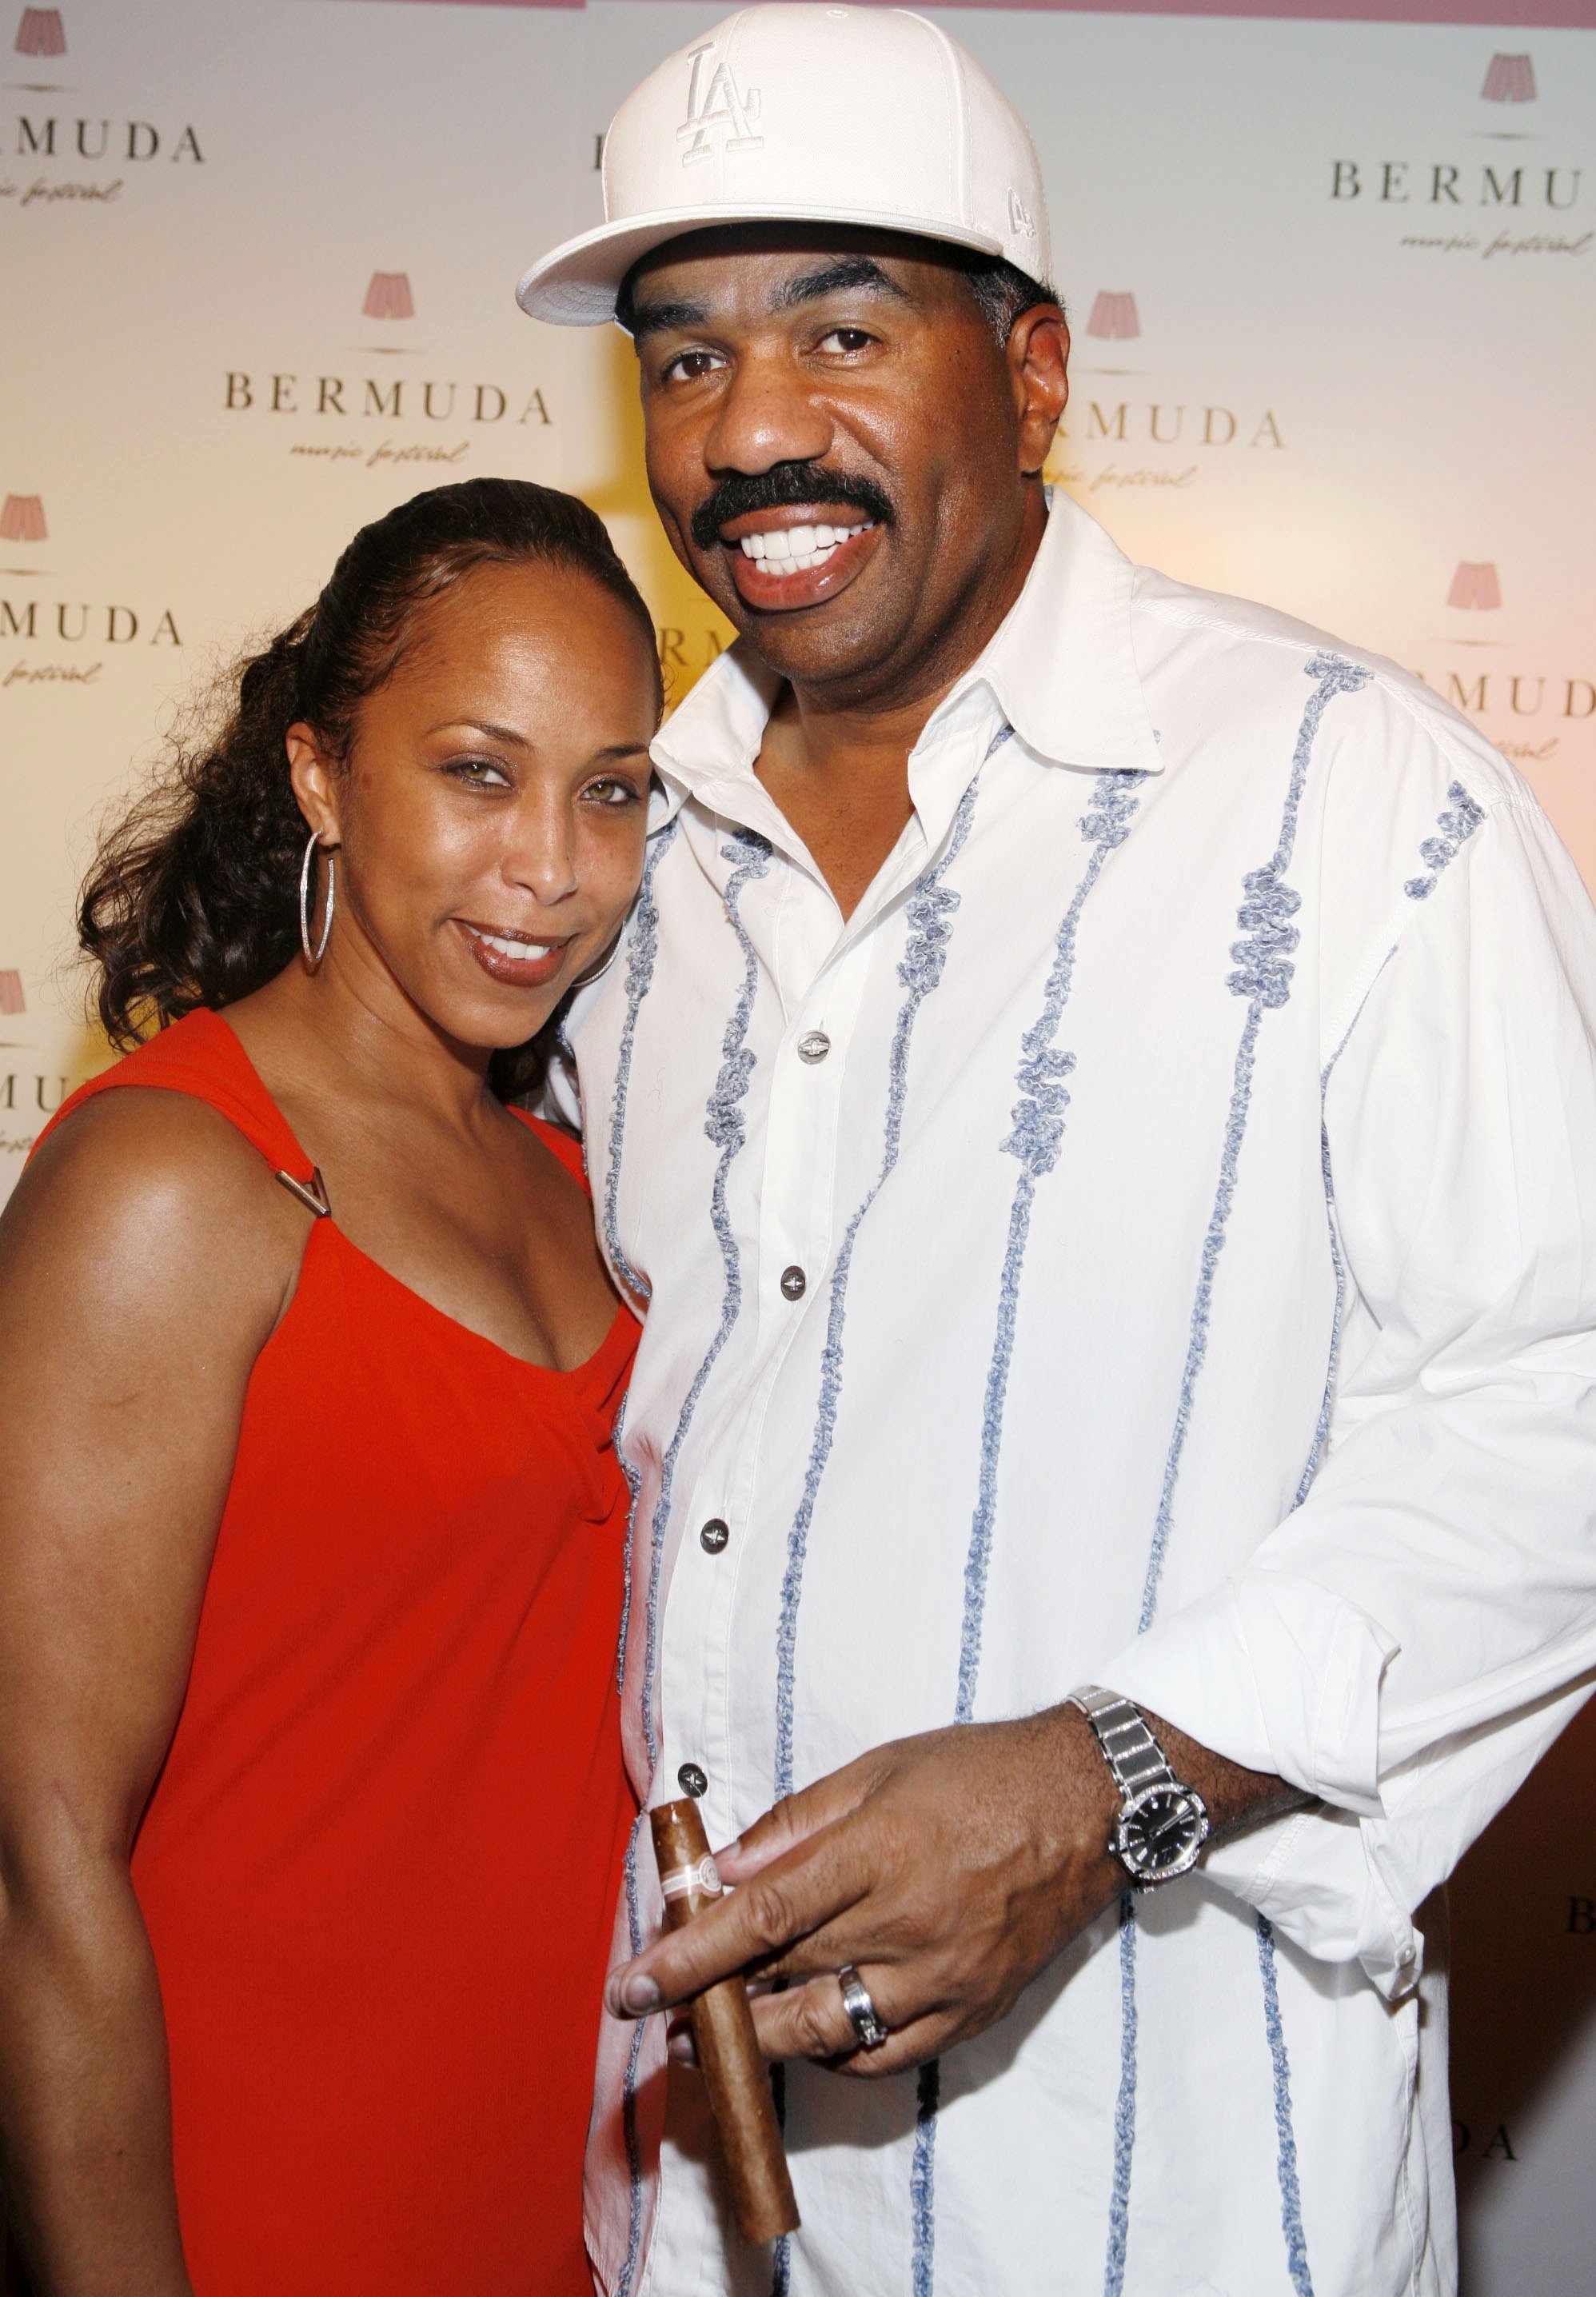 Marjorie Bridges and Steve Harvey attend the first night of the Bermuda Music Festival at Southampton Beach Club on October 3, 2007 in Southampton, Bermuda ┃Source: Getty Images